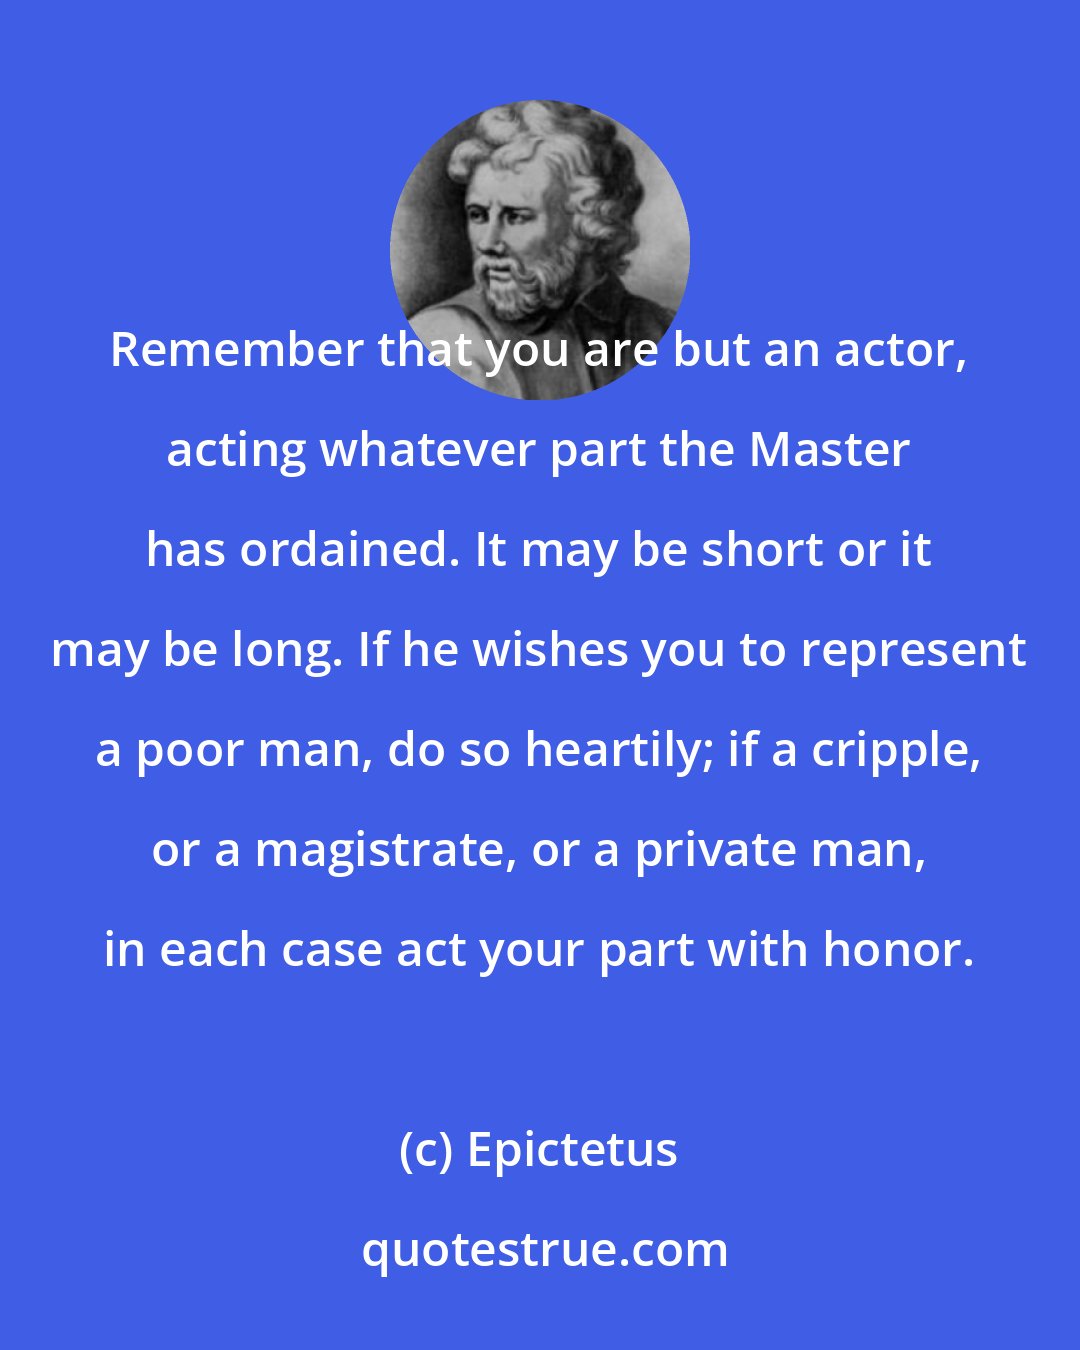 Epictetus: Remember that you are but an actor, acting whatever part the Master has ordained. It may be short or it may be long. If he wishes you to represent a poor man, do so heartily; if a cripple, or a magistrate, or a private man, in each case act your part with honor.